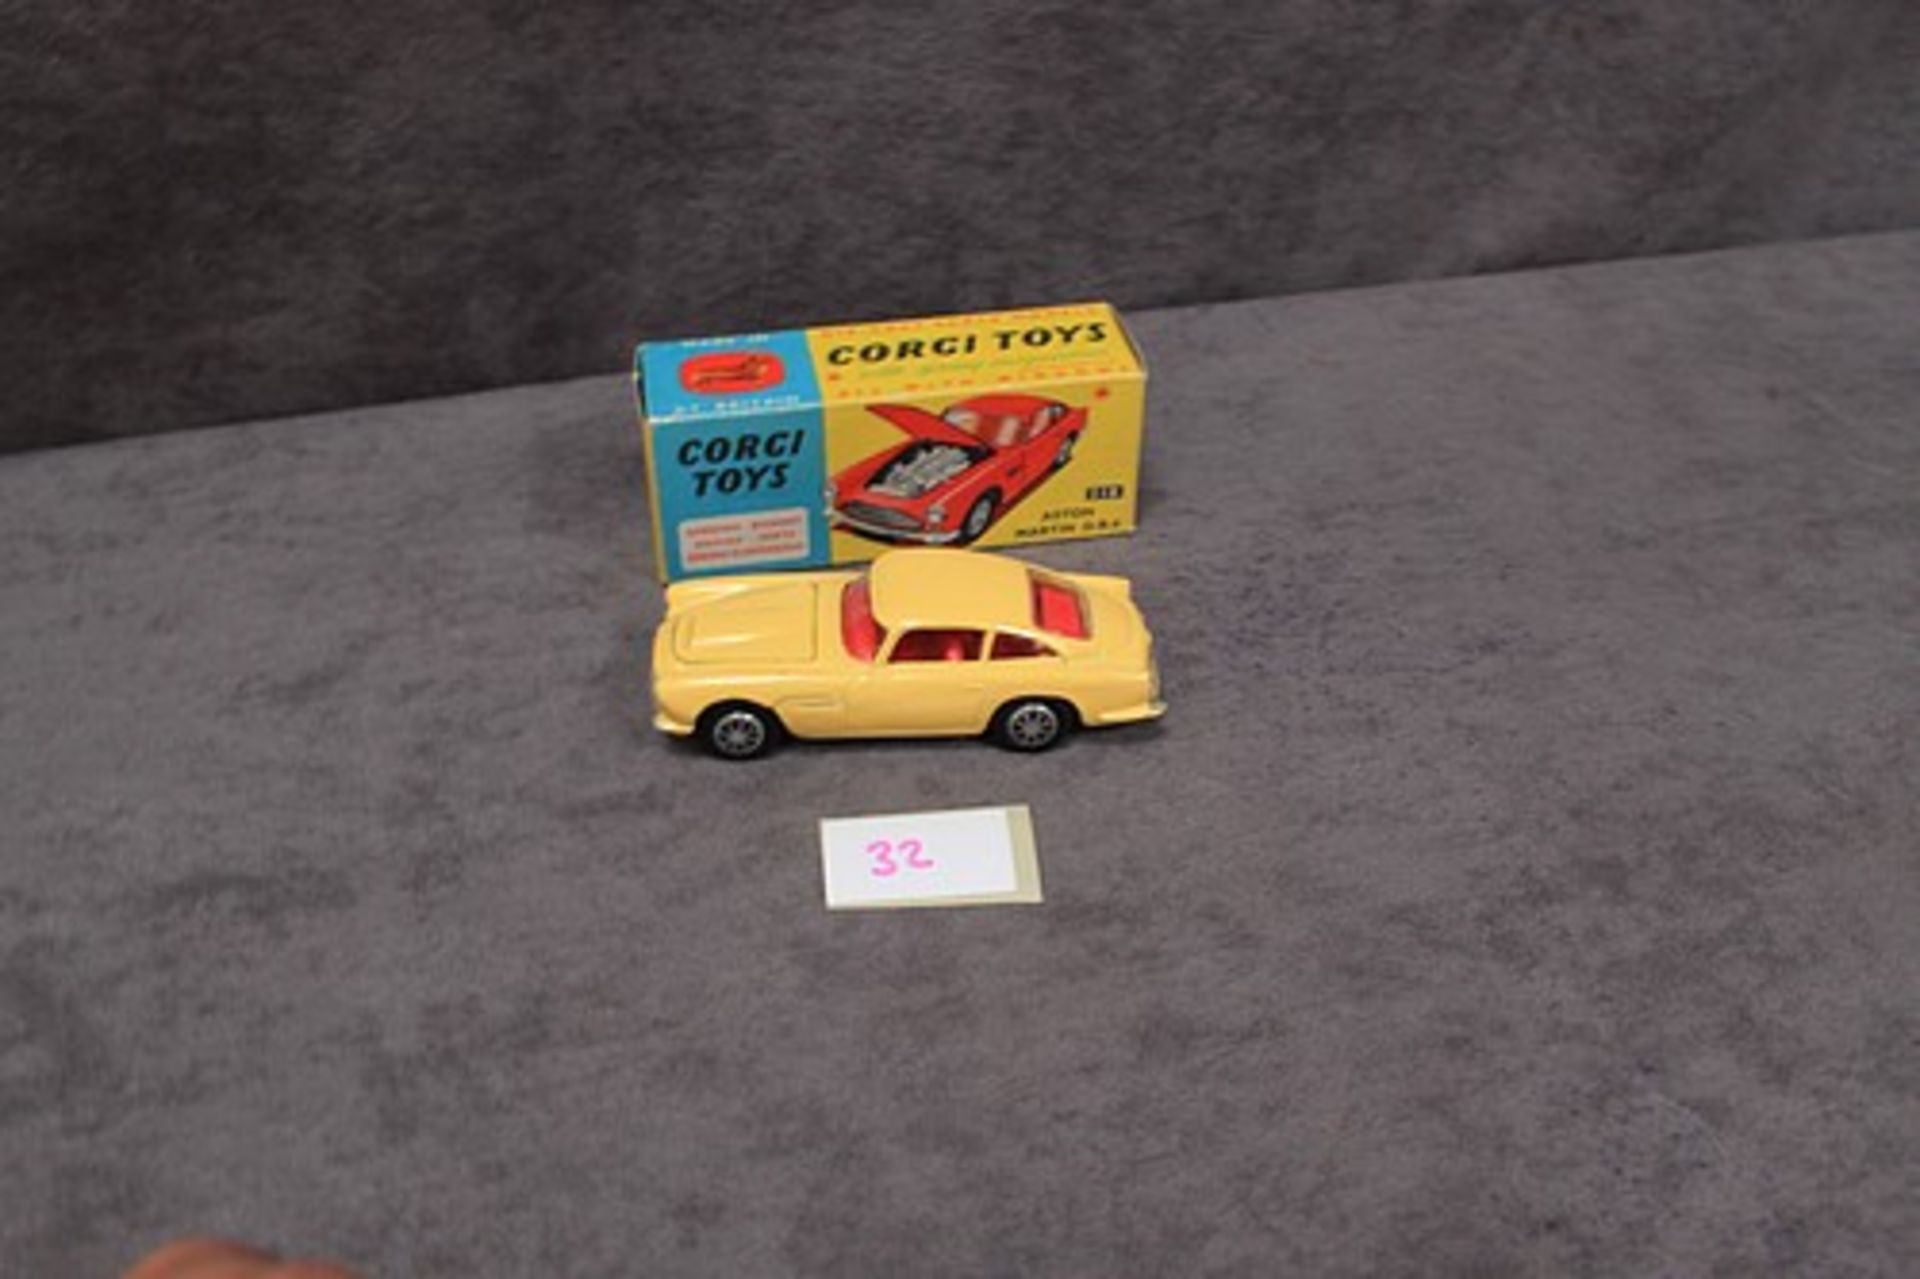 Mint Corgi Toys Diecast #218 Aston Martin DB4 in yellow in a excellent box - Image 2 of 2